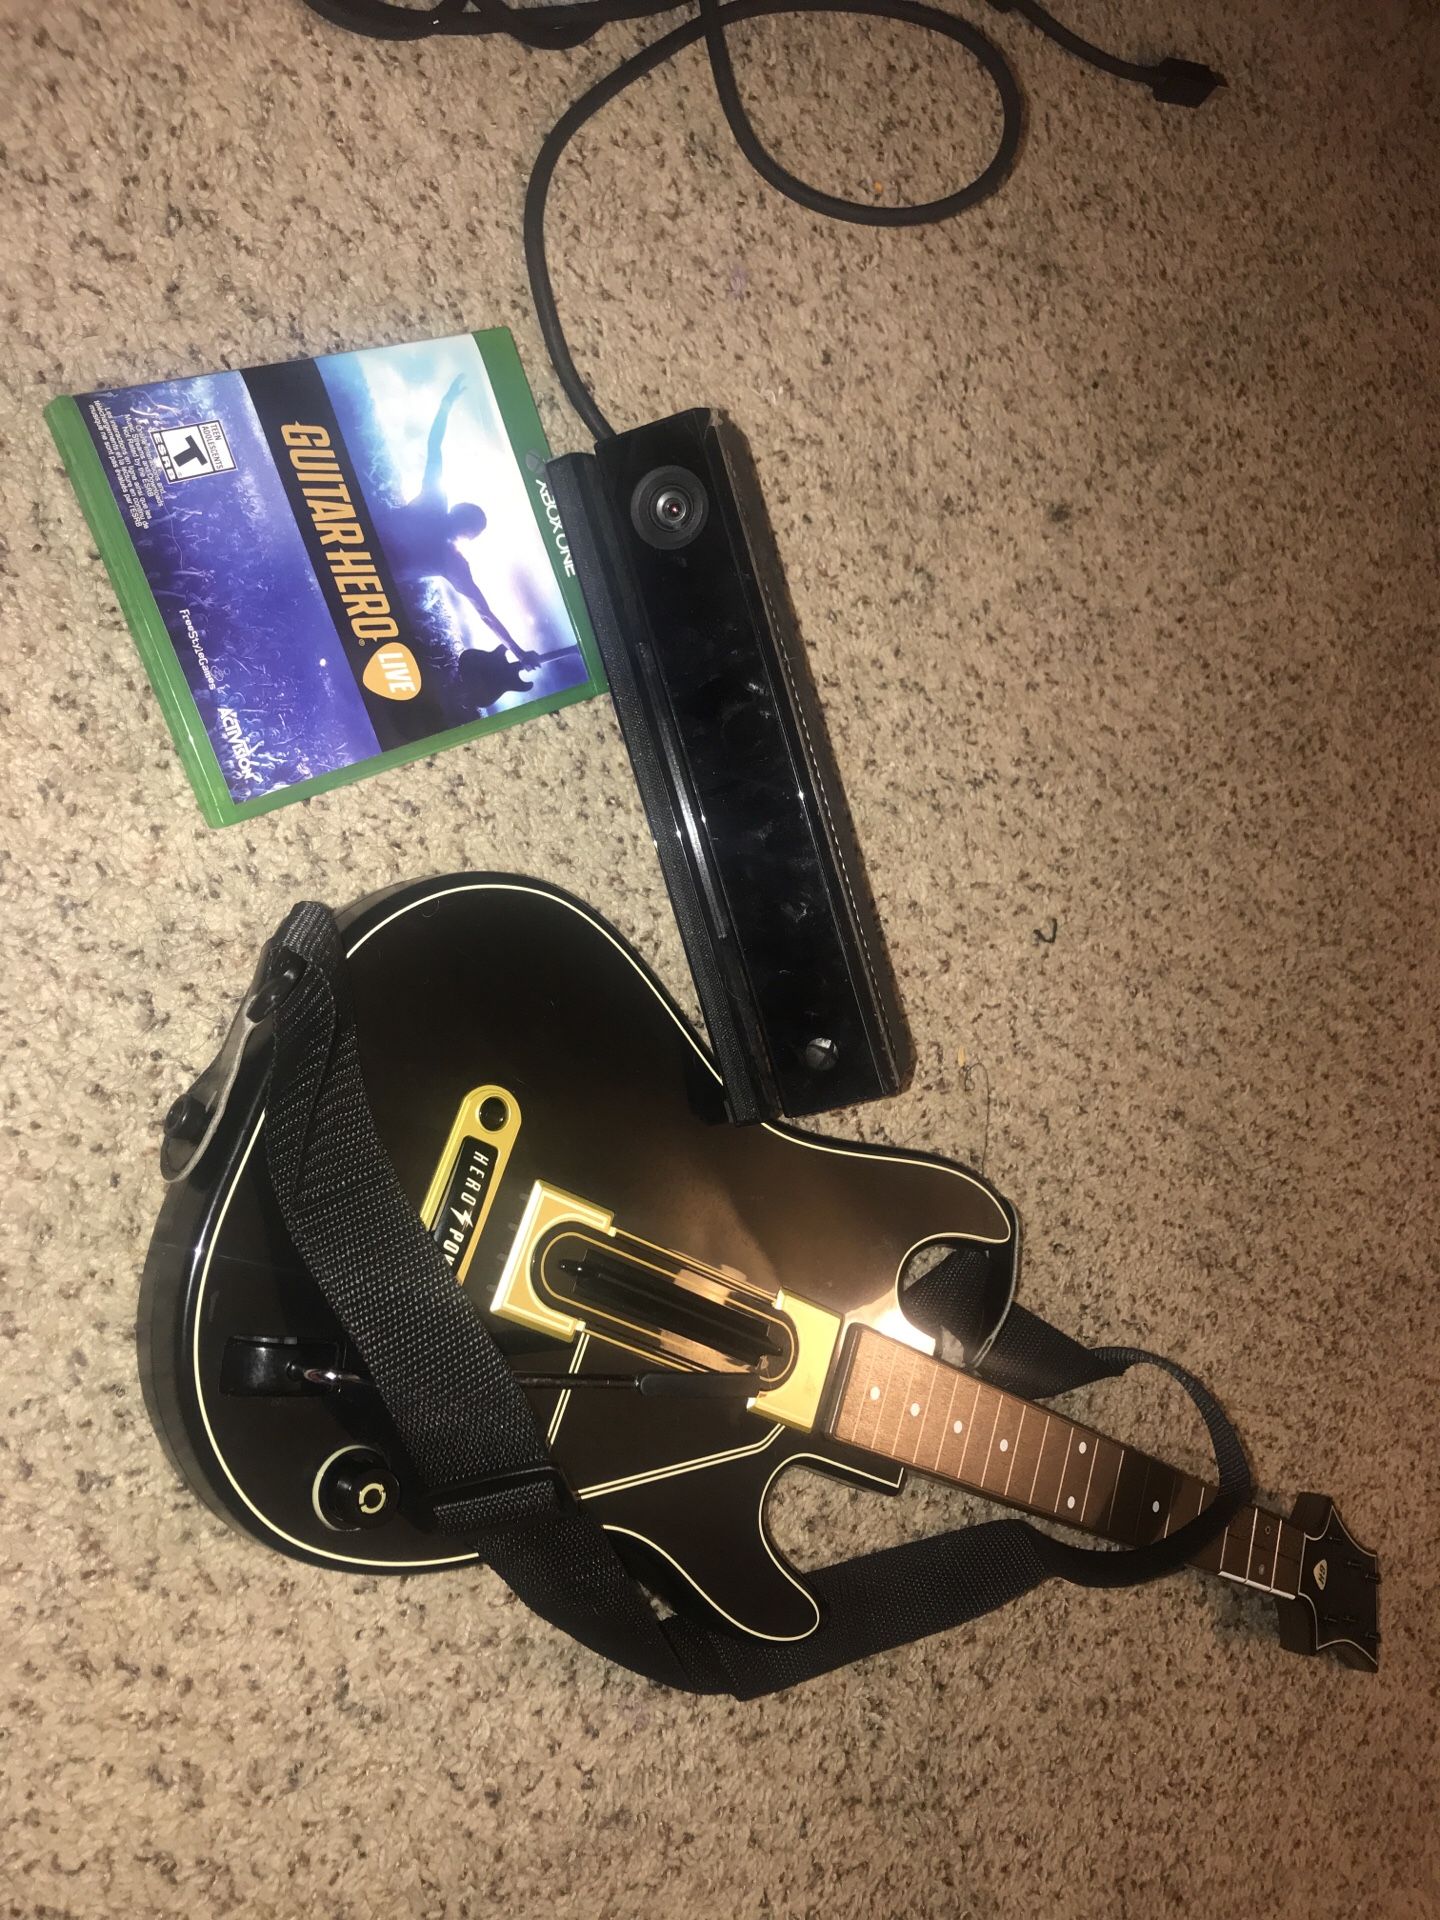 Xbox one Kinect guitar hero game and guitar